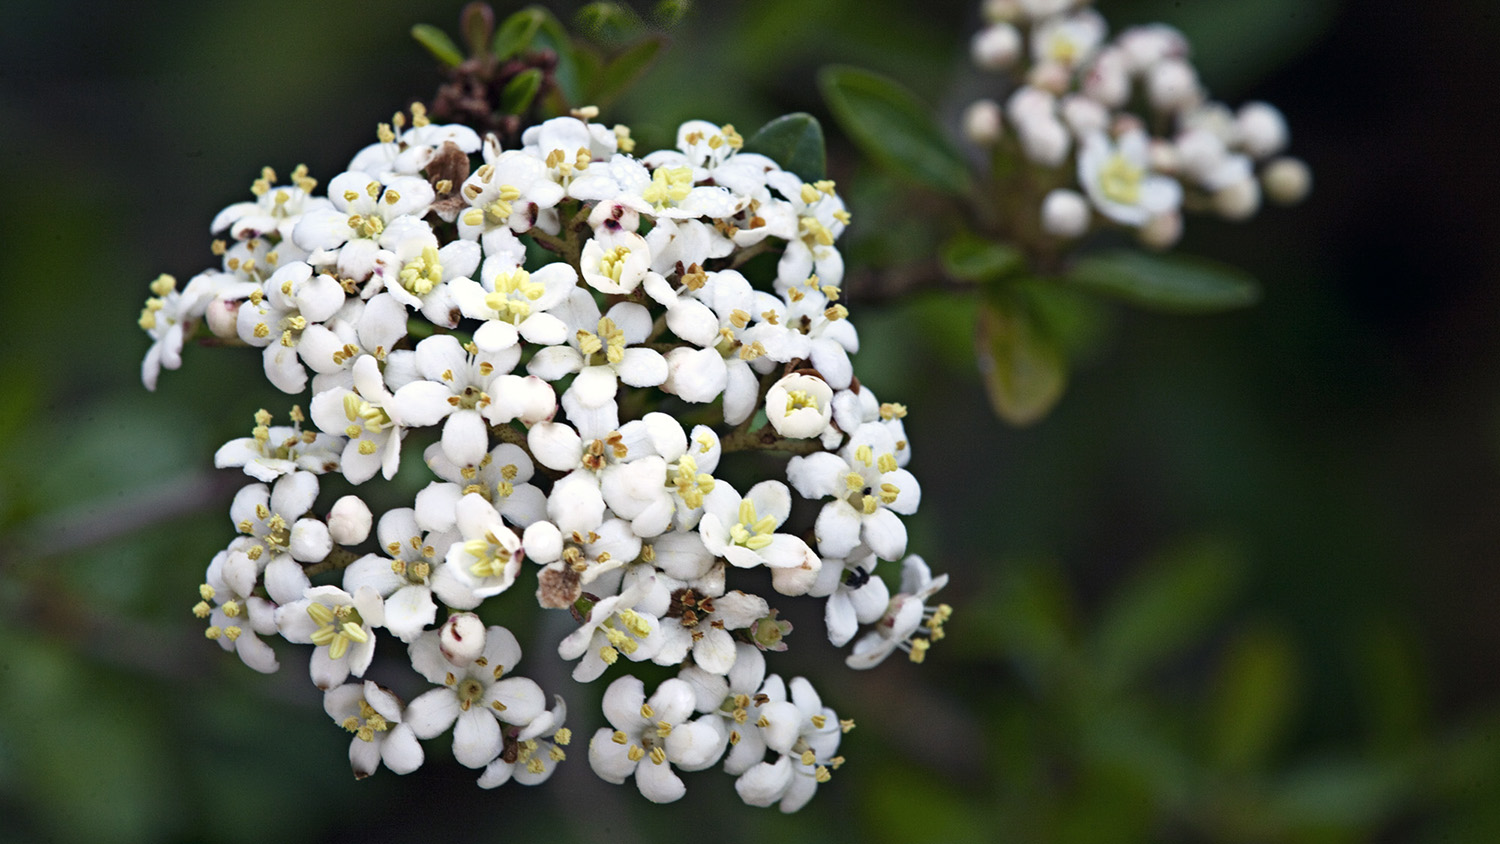 viburnum with clusters of small white flowers